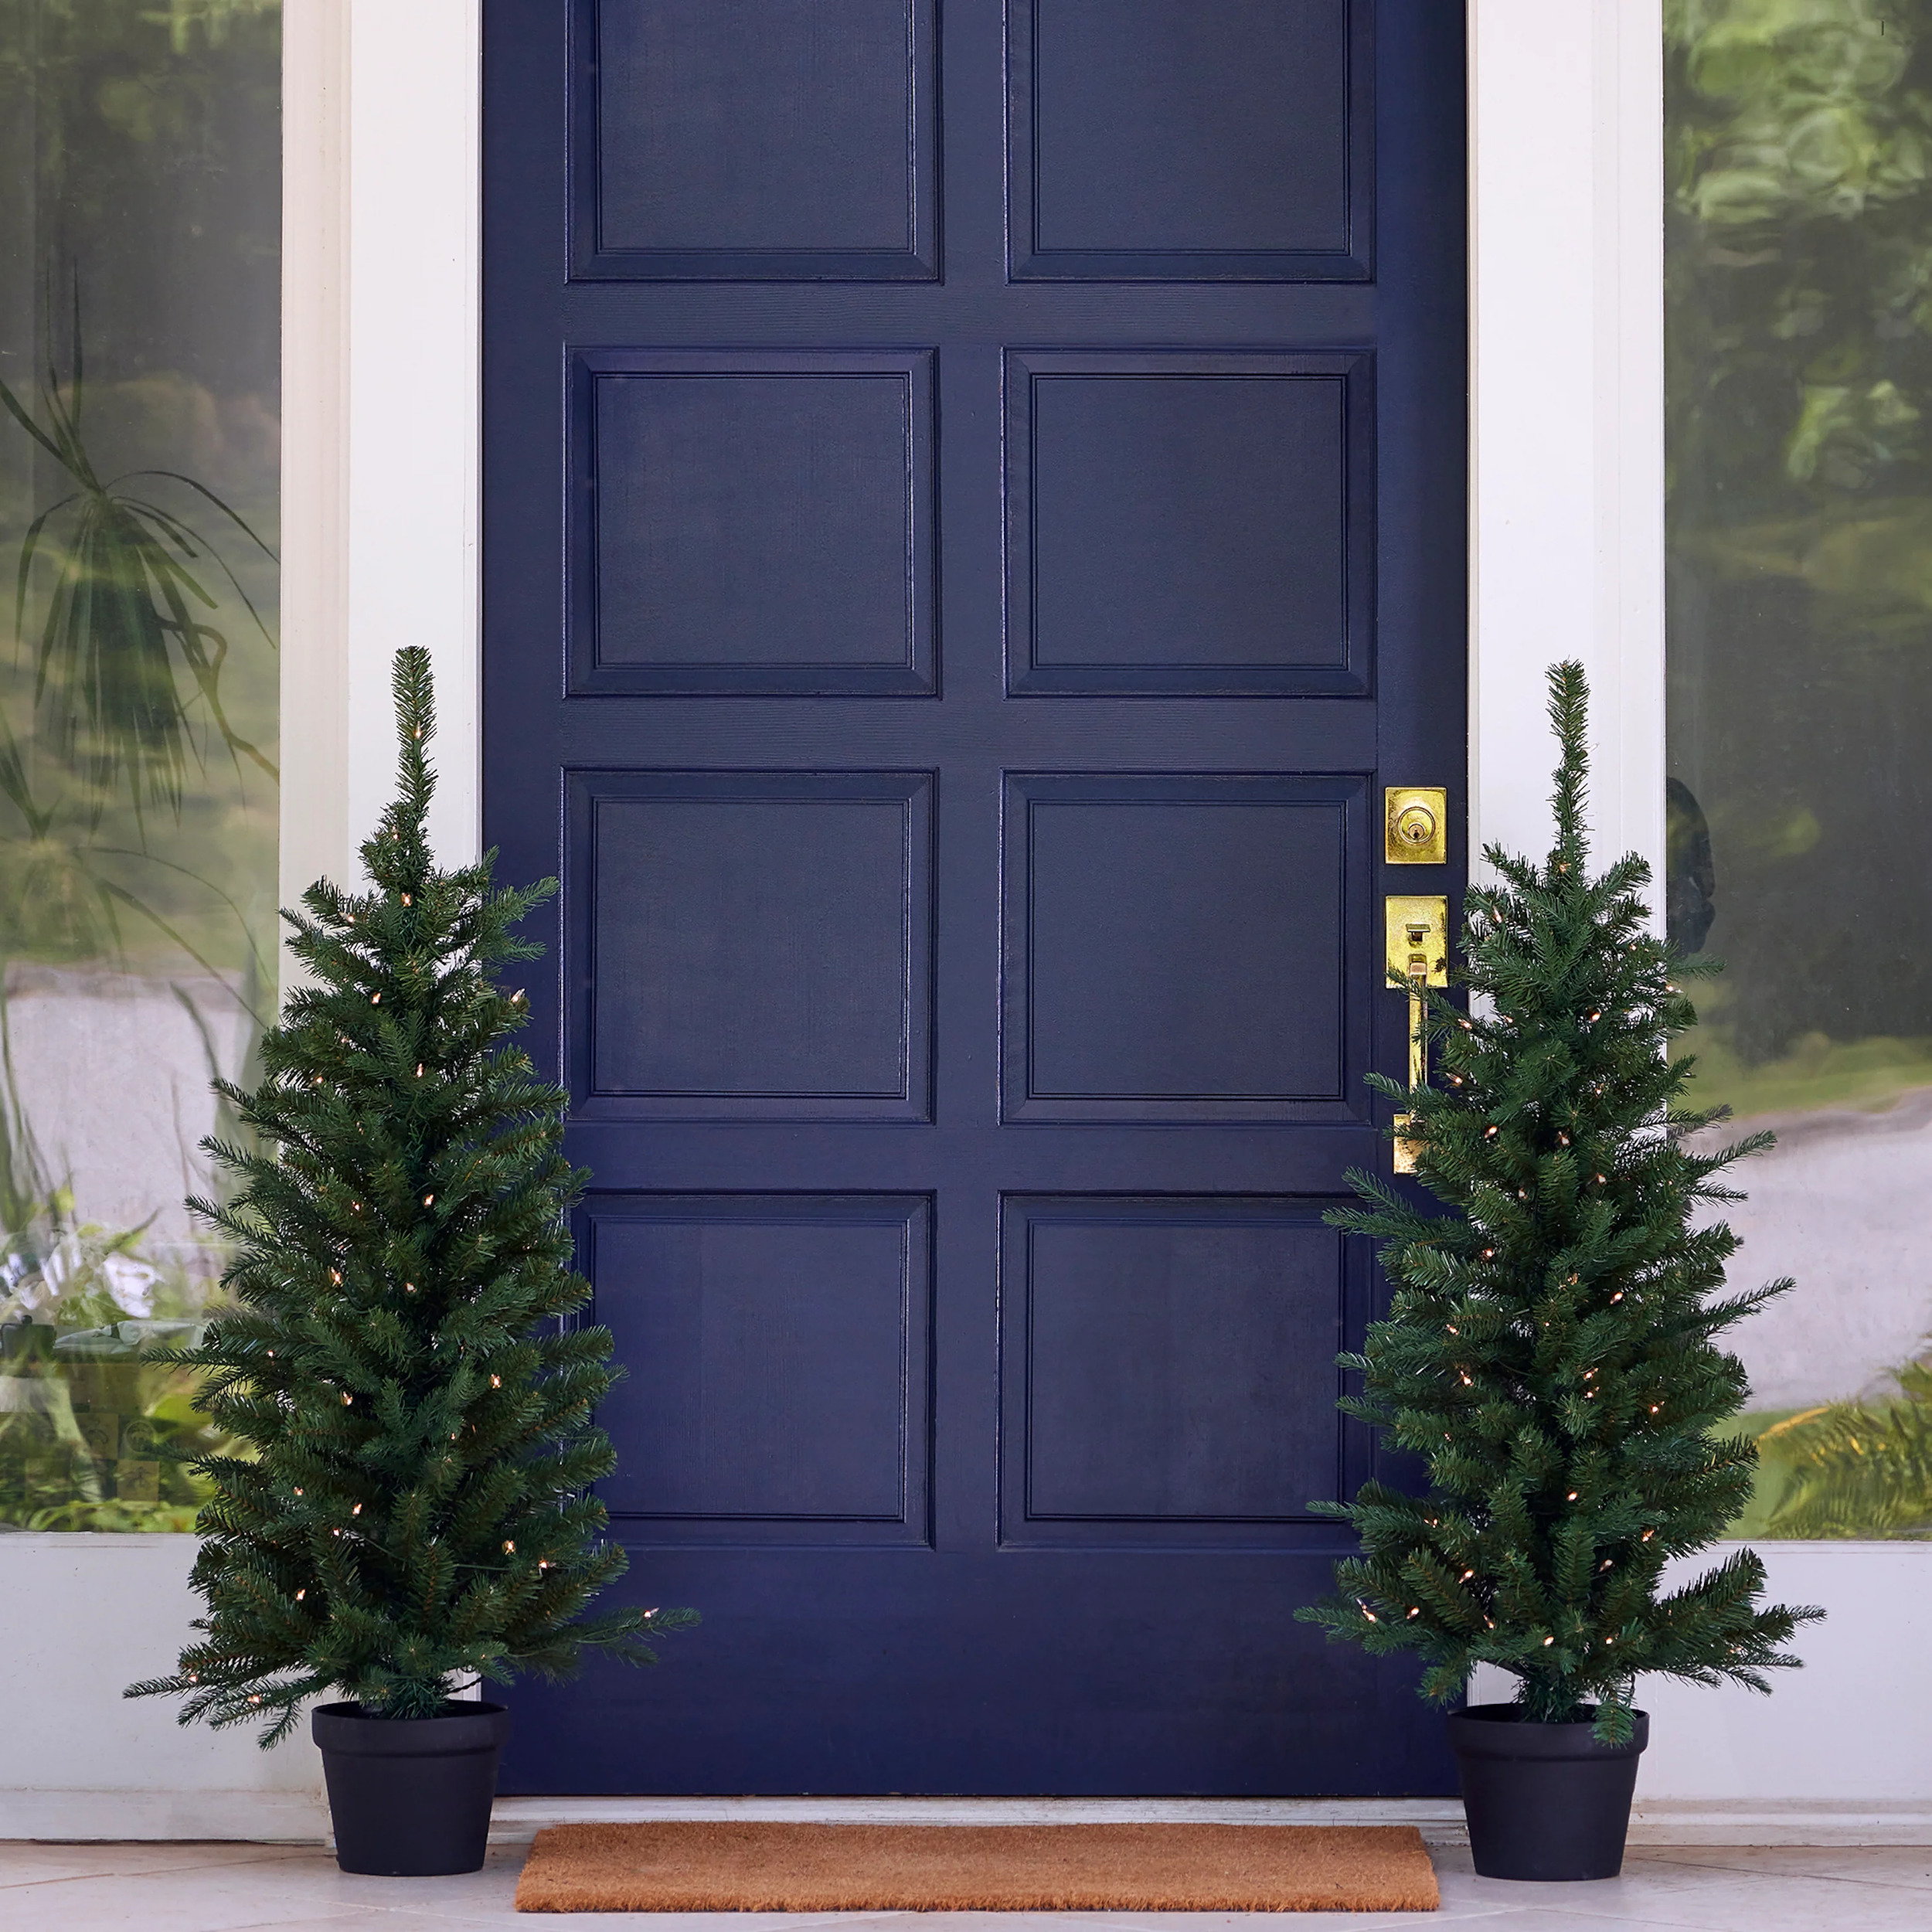 4ft Valley Pine Porch Tree (Set of 2) Each Tree is Pre-Lit with 50 UL Clear Lights by Seasonal LLC - image 4 of 4